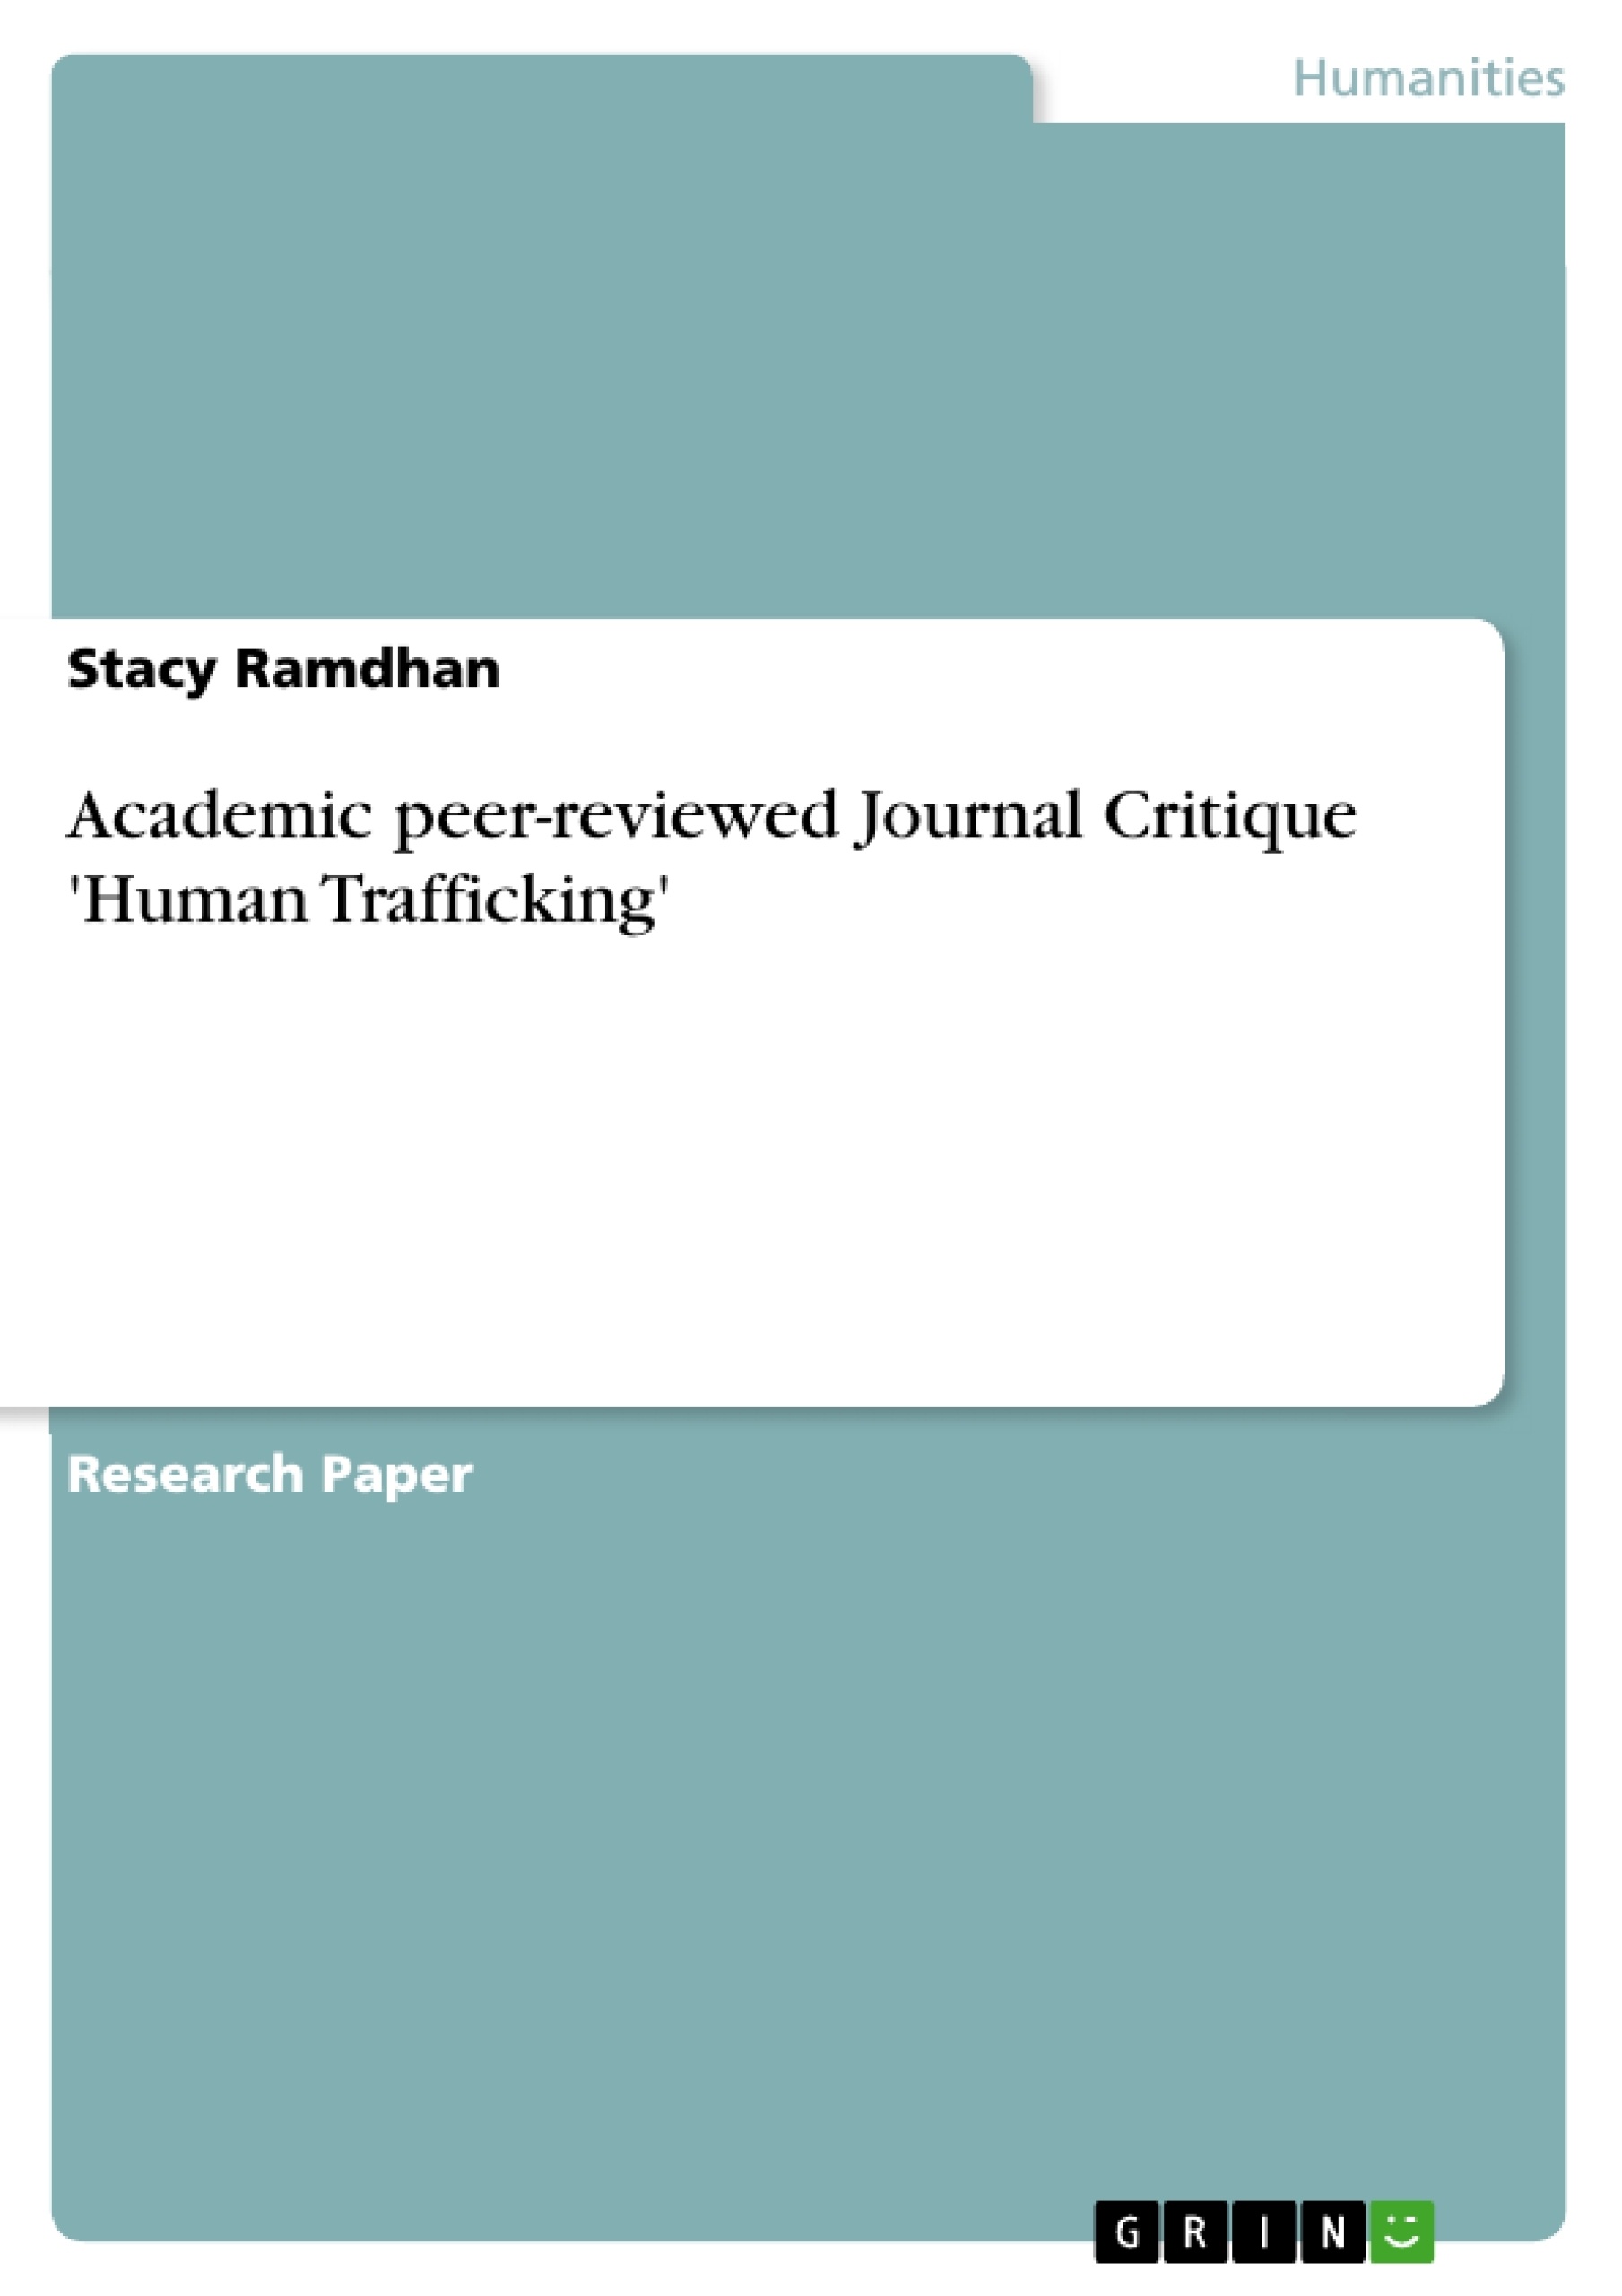 thesis for human trafficking paper